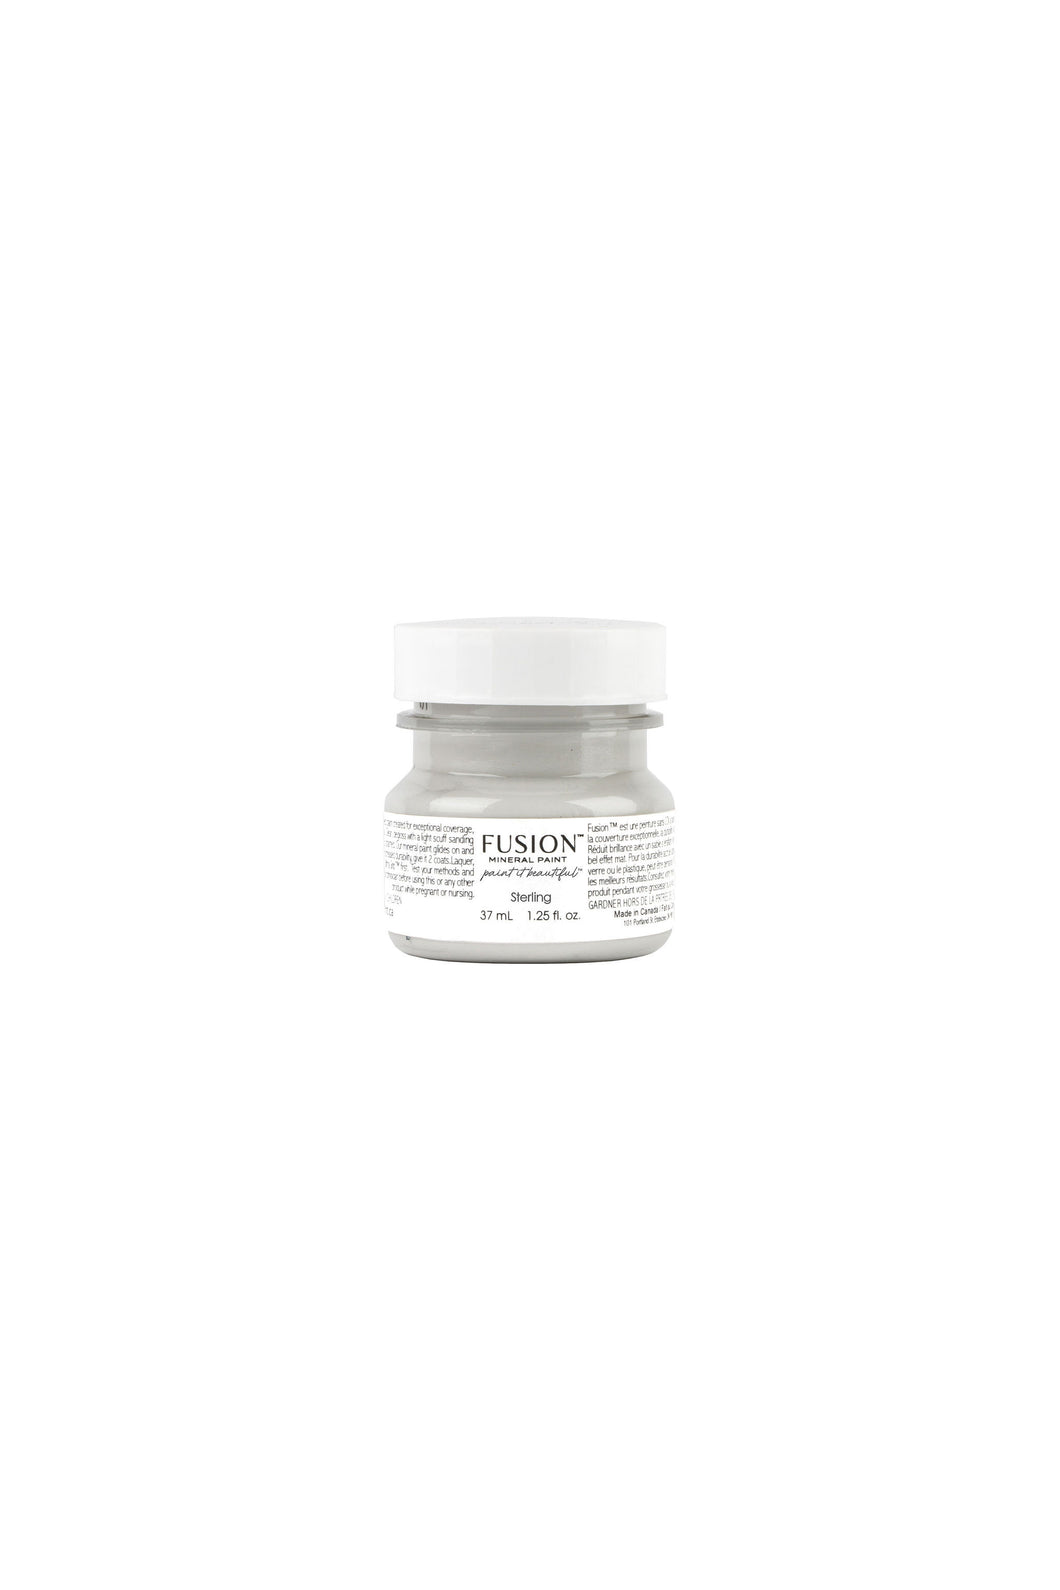 Fusion Mineral Paint - Sterling 37 ml Jar